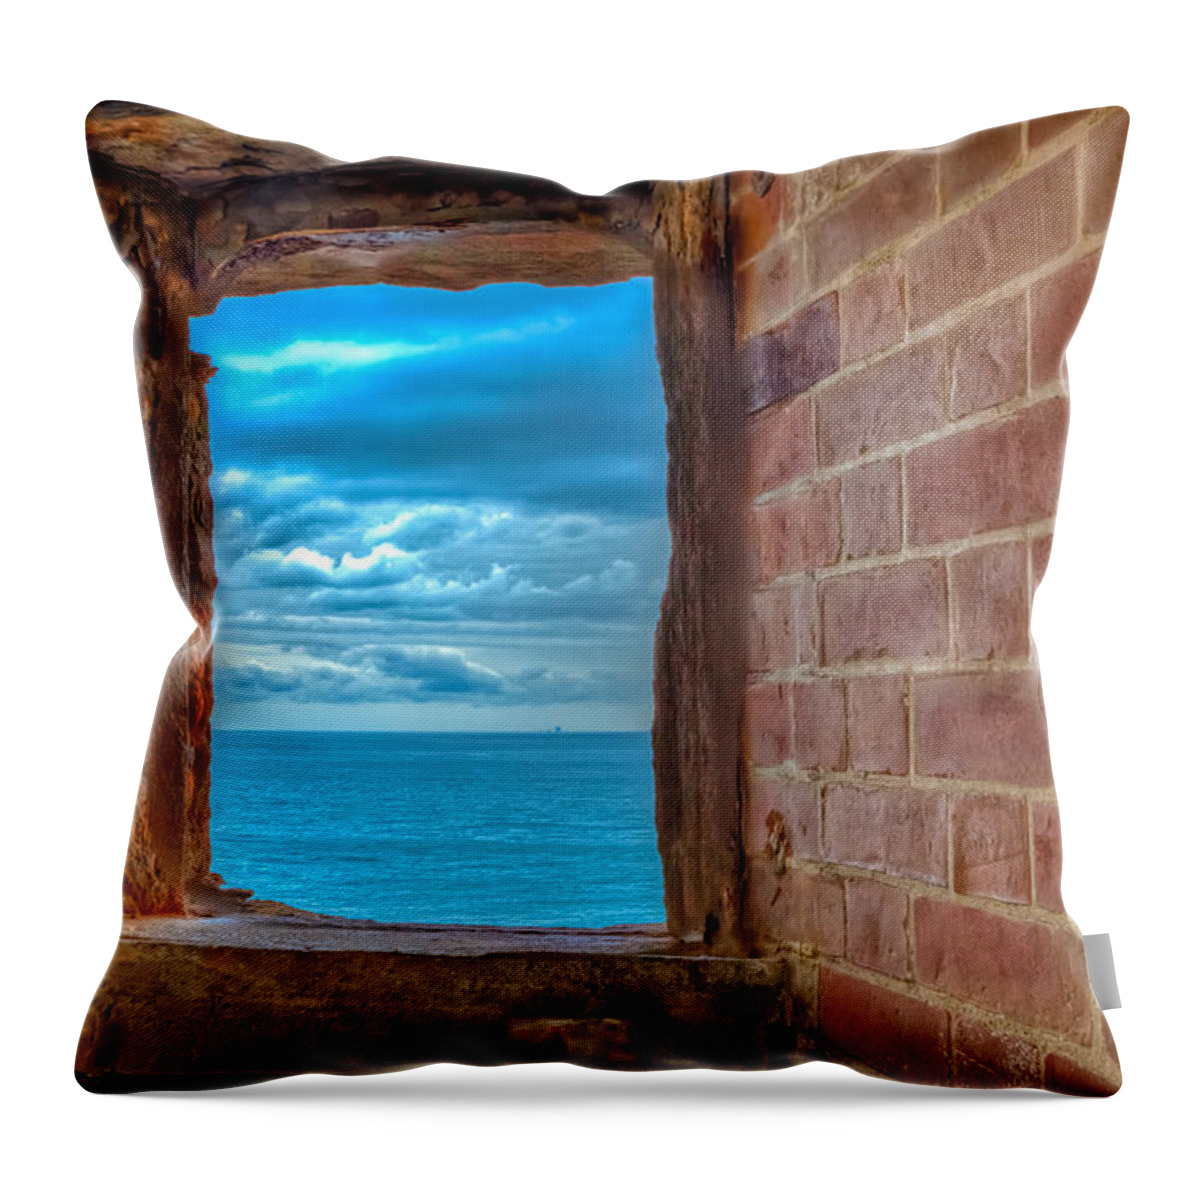 Landscape Throw Pillow featuring the photograph Drifting by Jonathan Nguyen